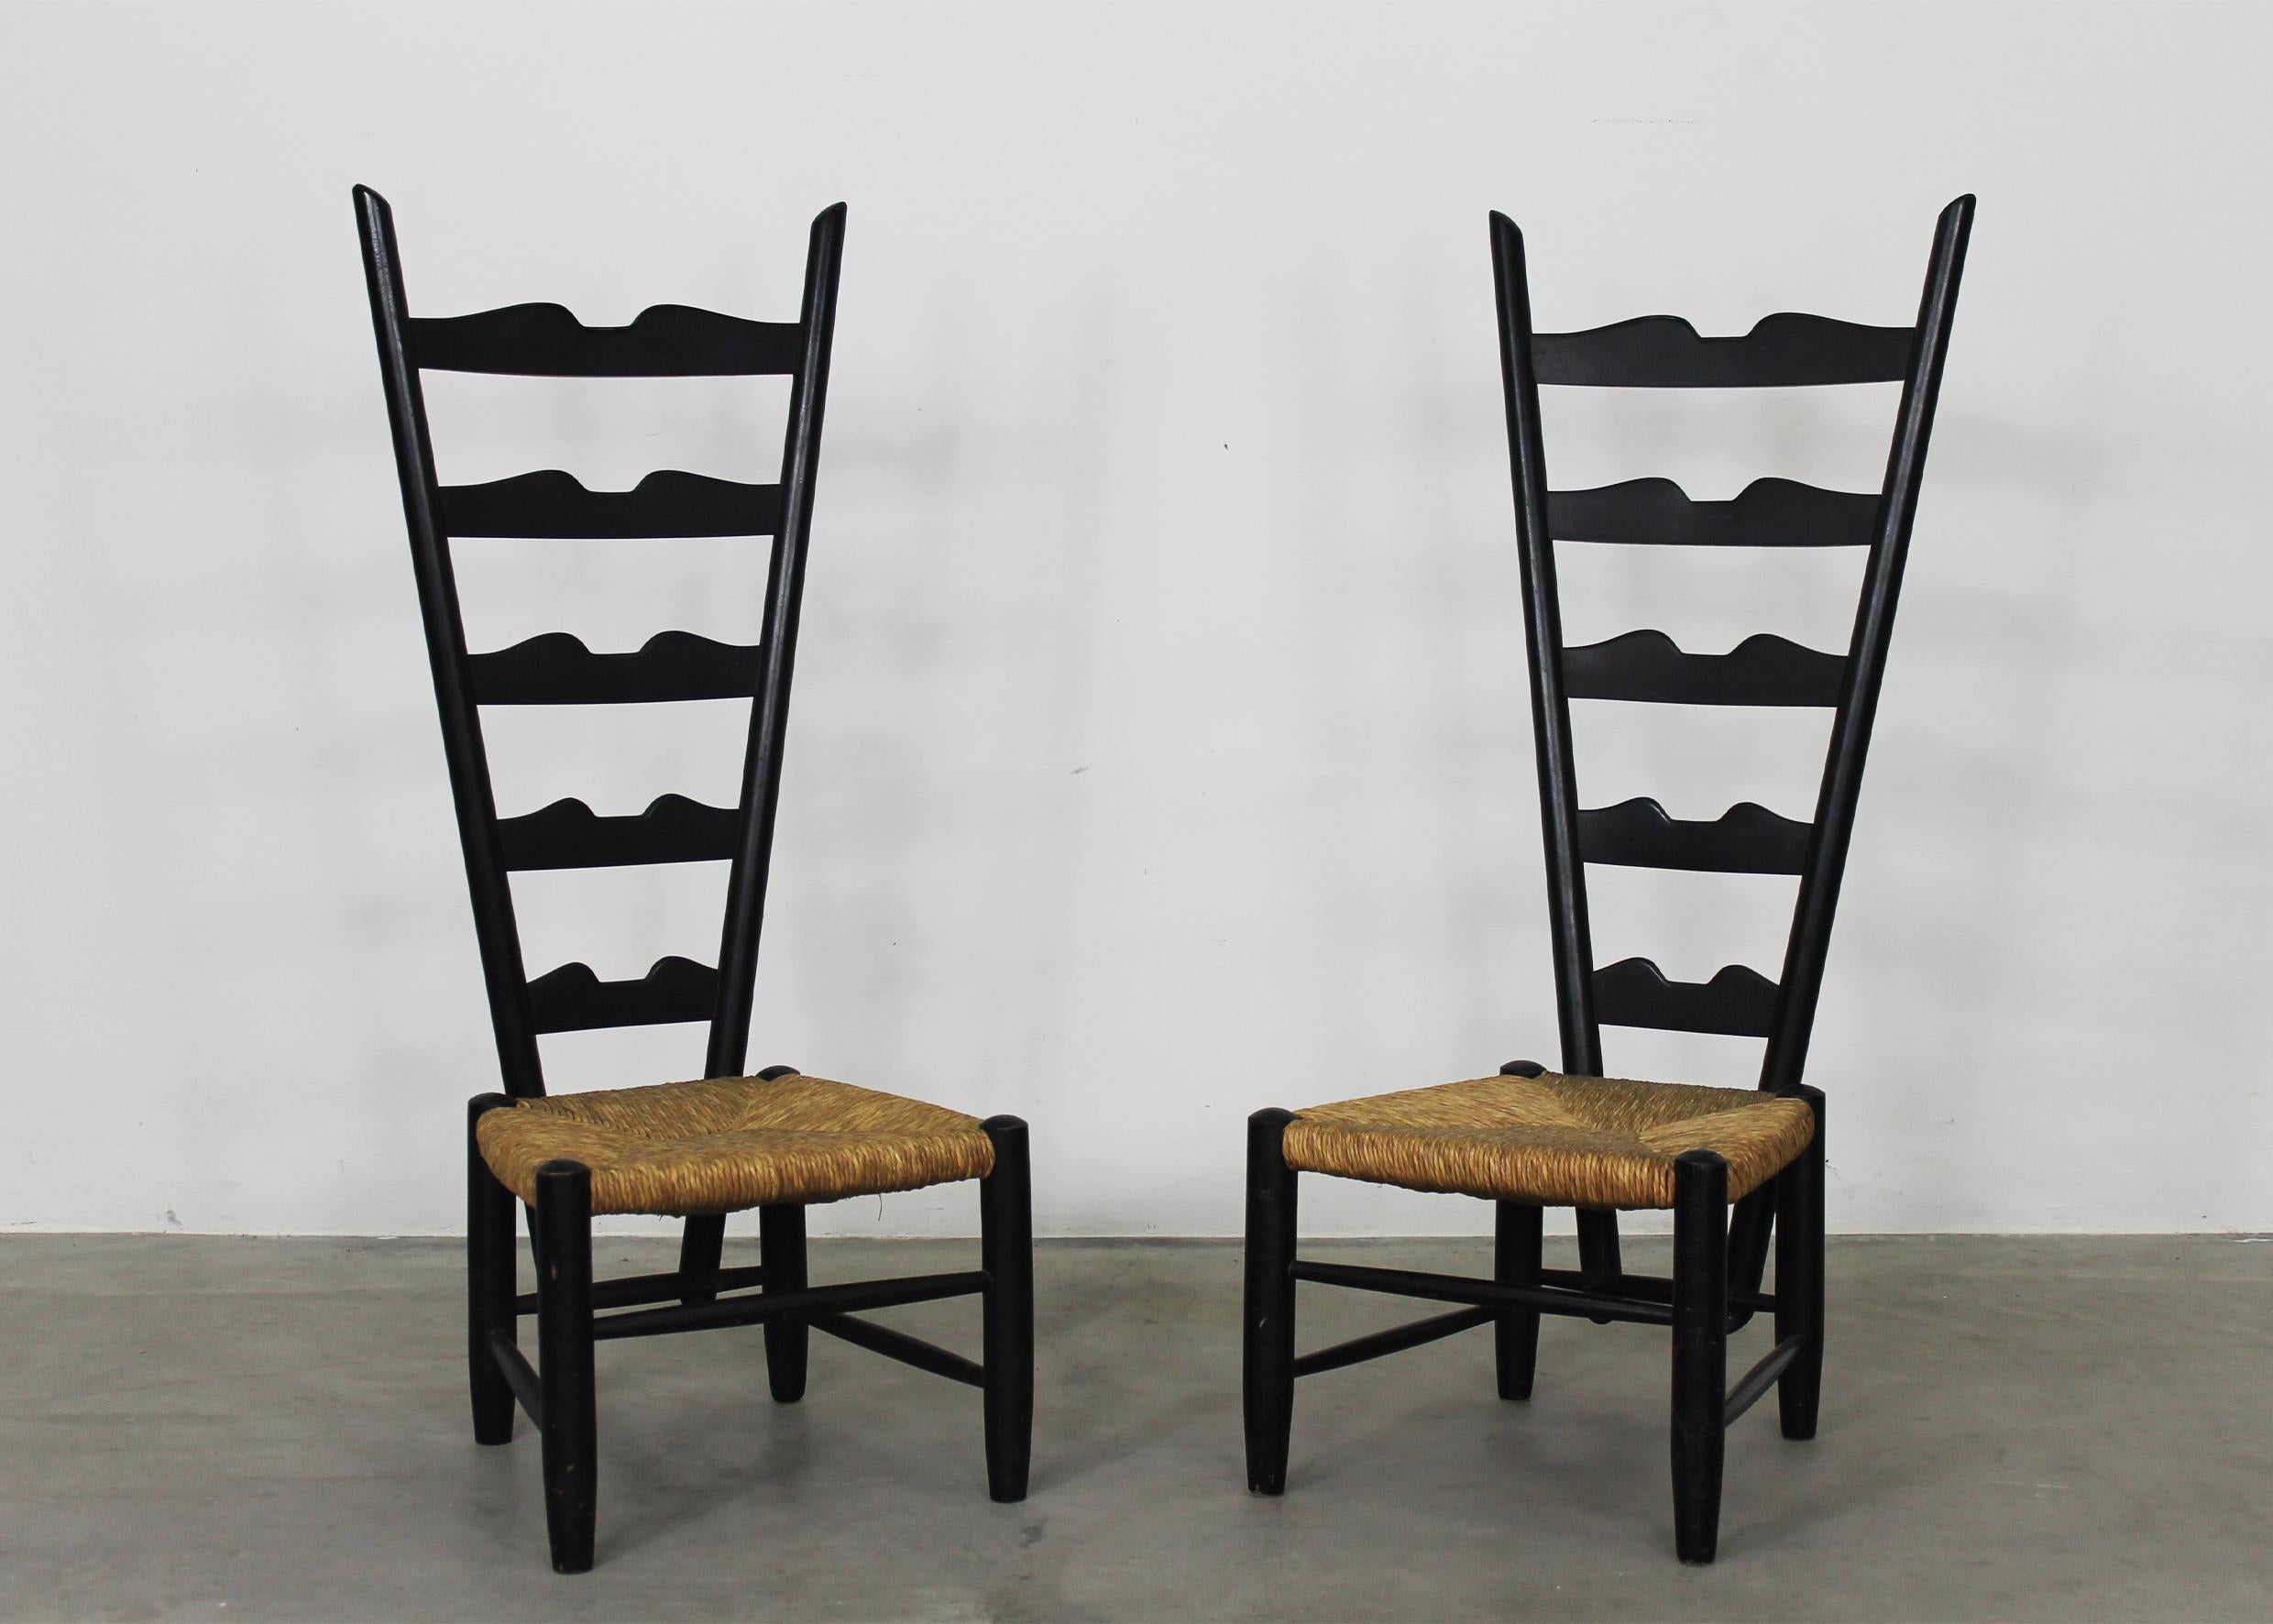 Italian Gio Ponti Set of Two Fireside Chairs in Black Lacquered Wood and Rush 1950s For Sale